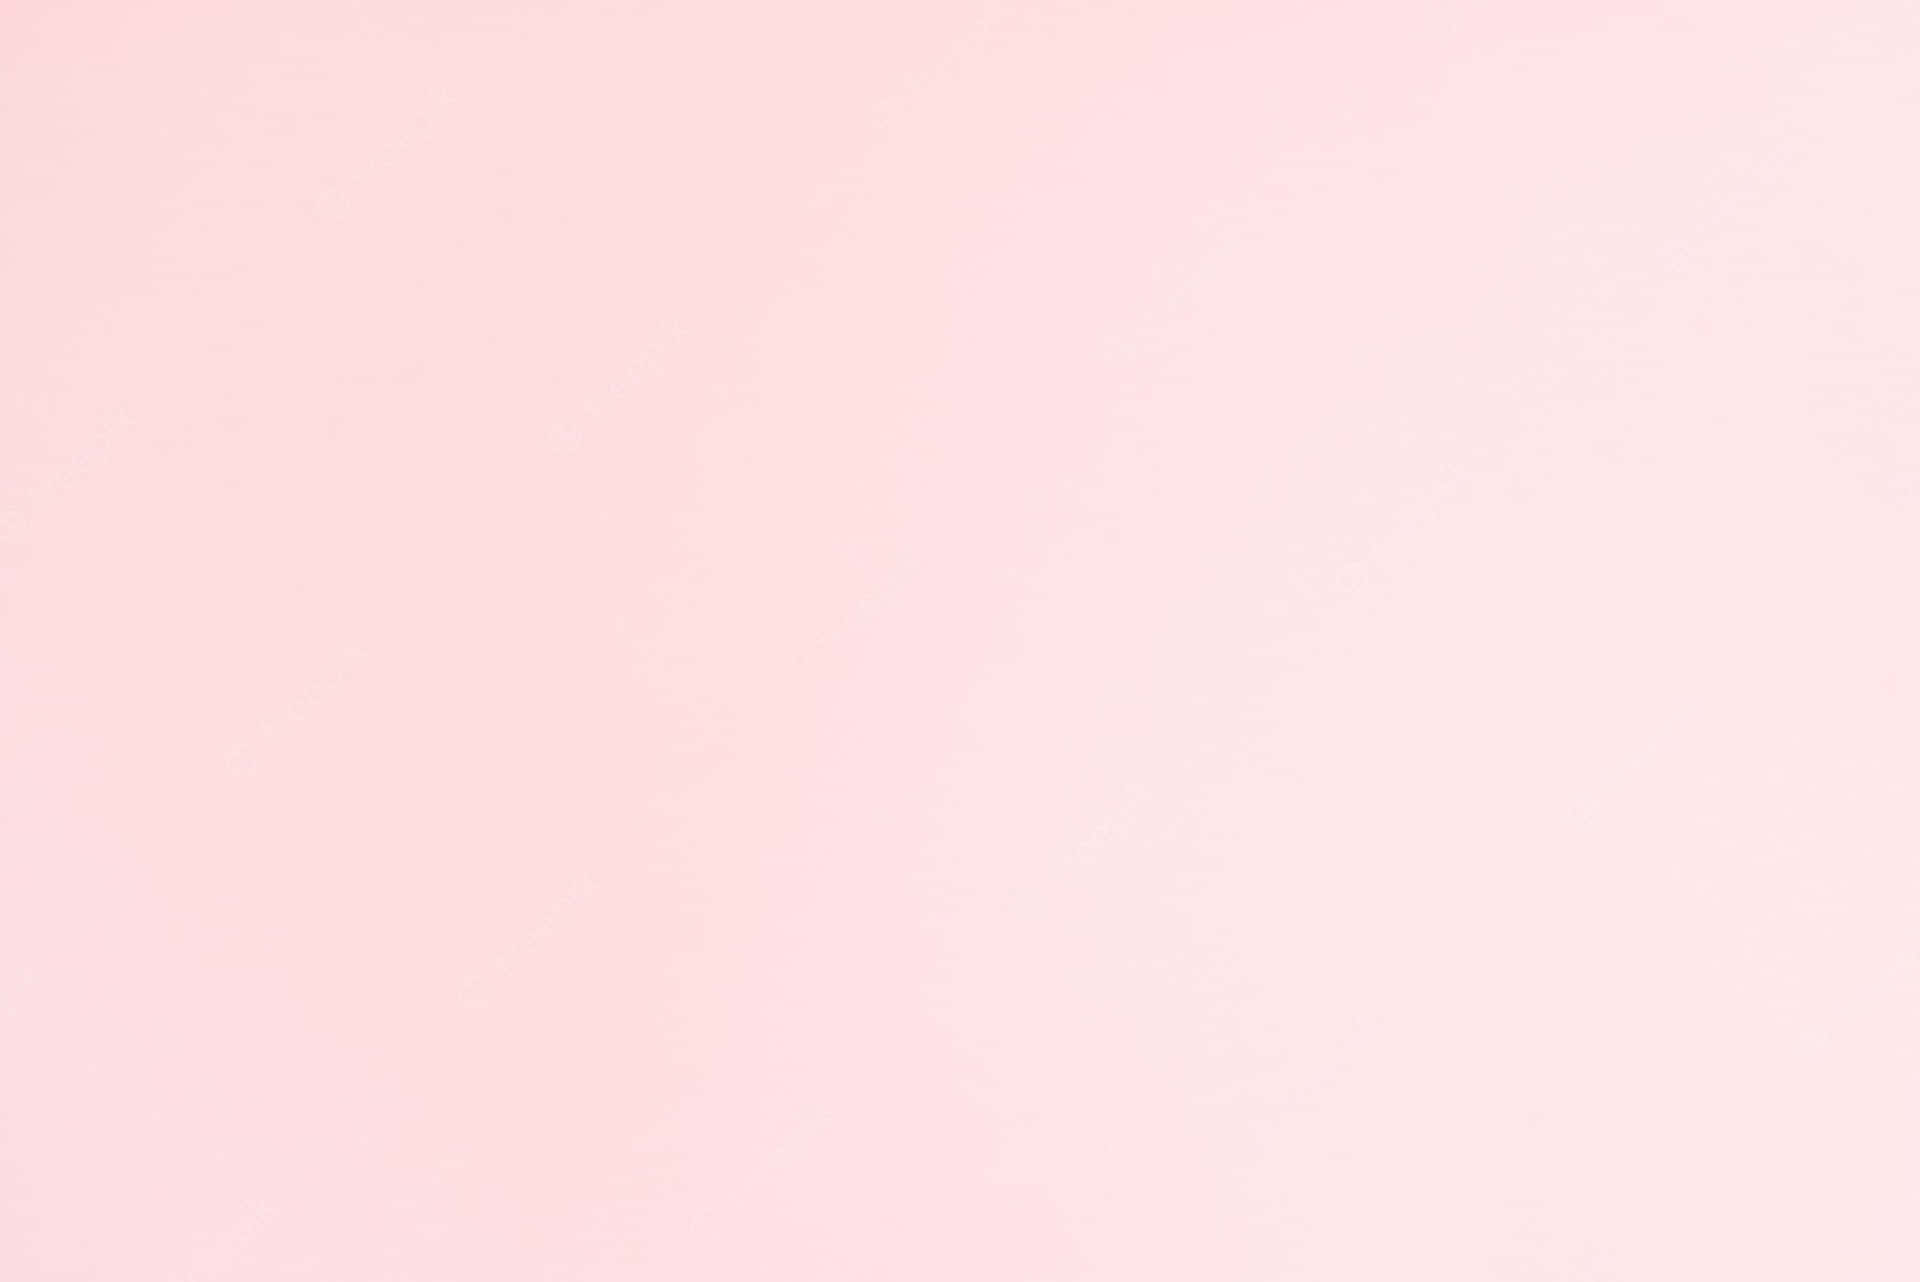 100+] Pink Solid Color Wallpapers 